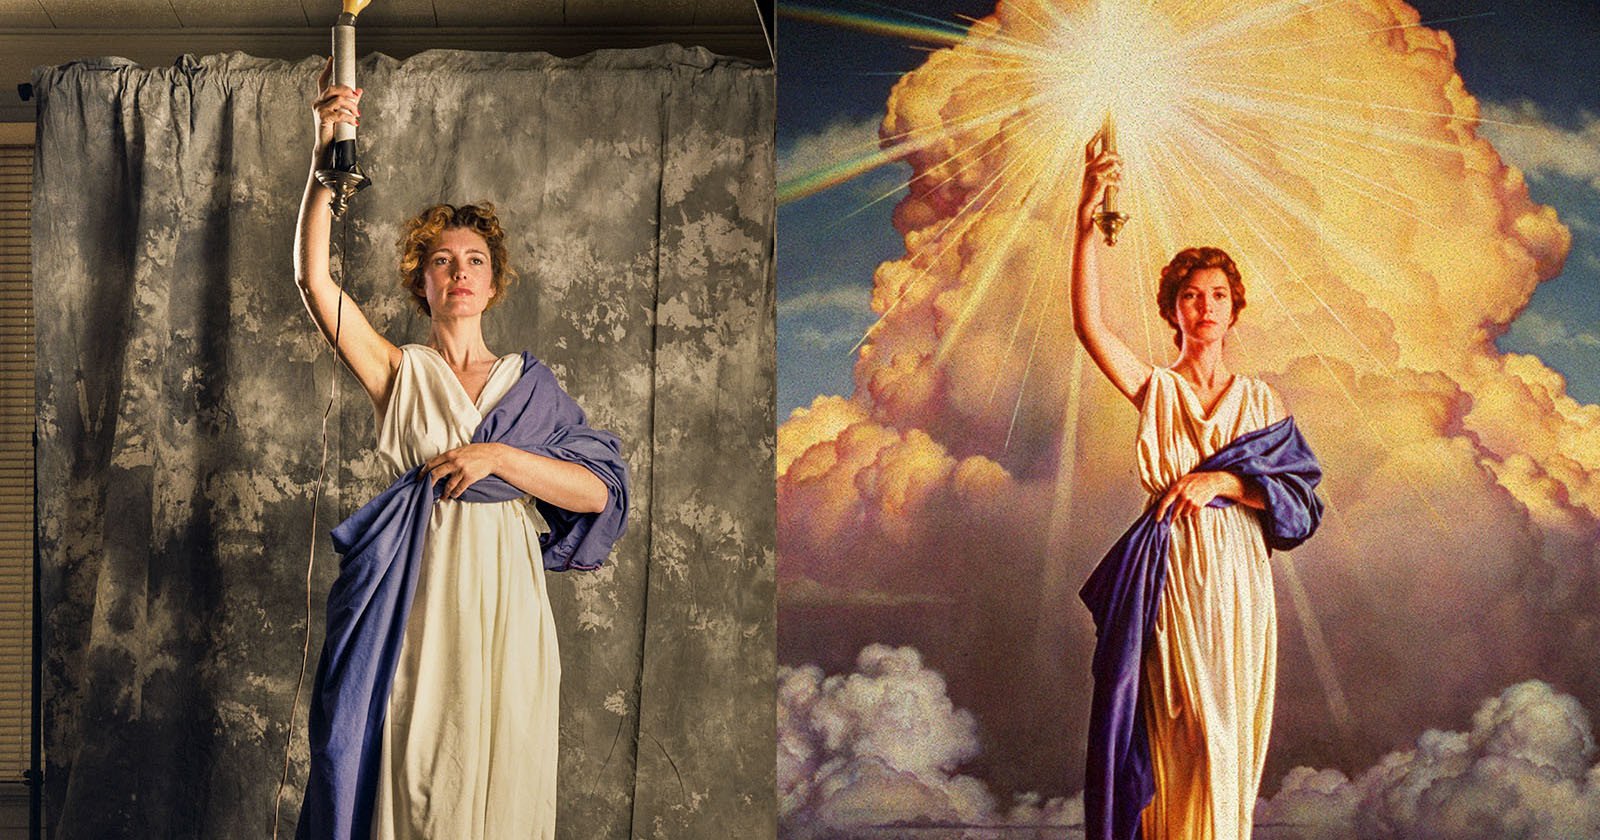 The Photo Behind the Iconic Columbia Pictures Torch Lady Logo